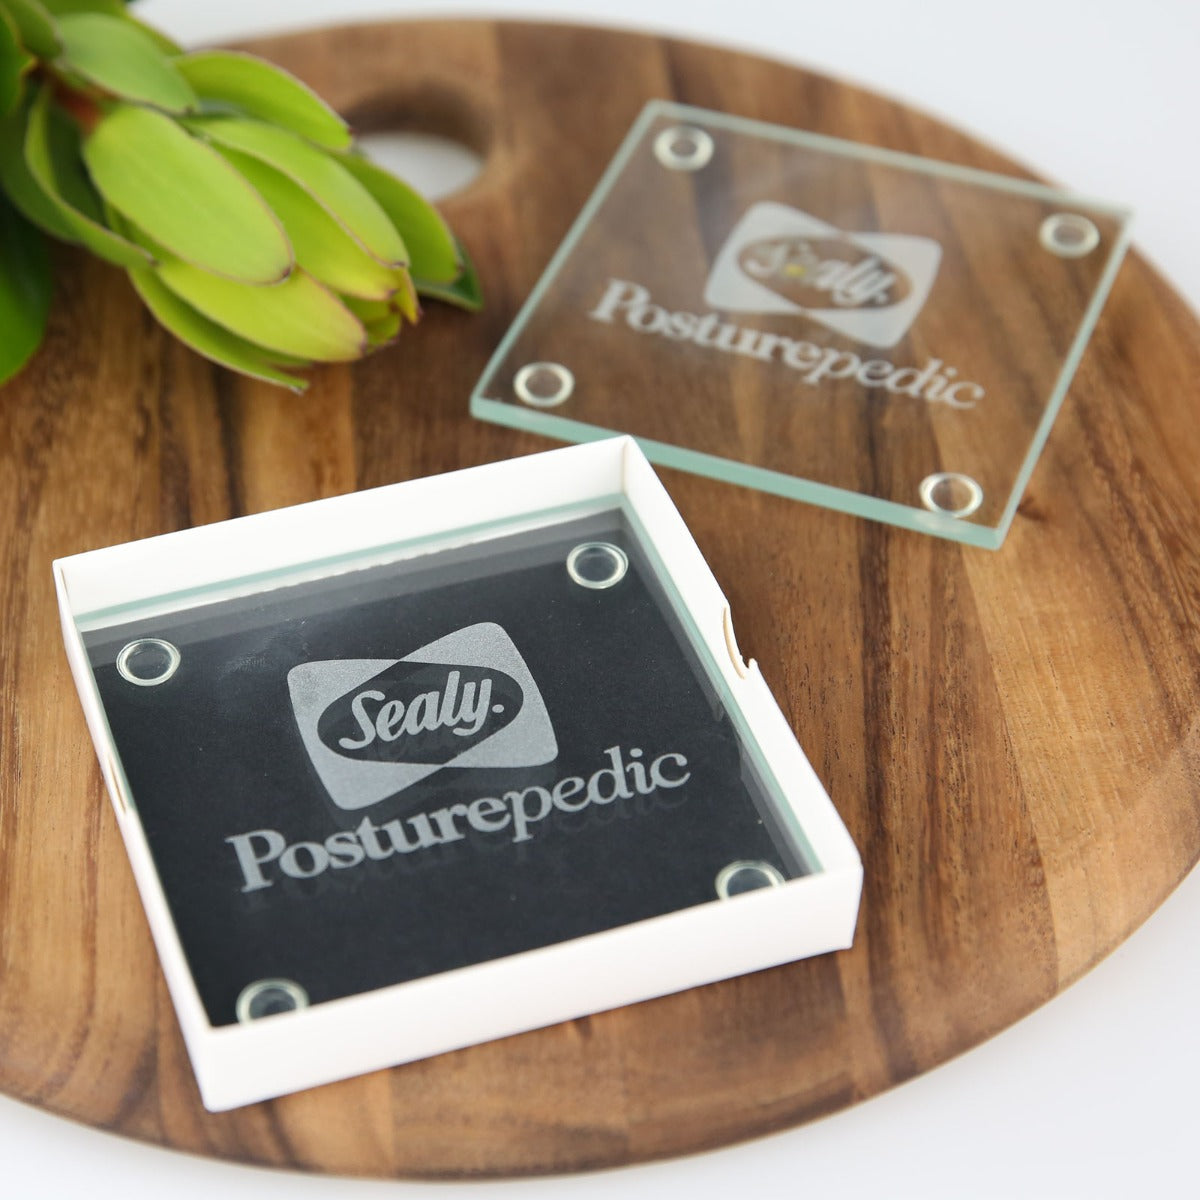 Fantastic Corporate Gift for Event. Trade Show or Employees Company Engraved Coasters